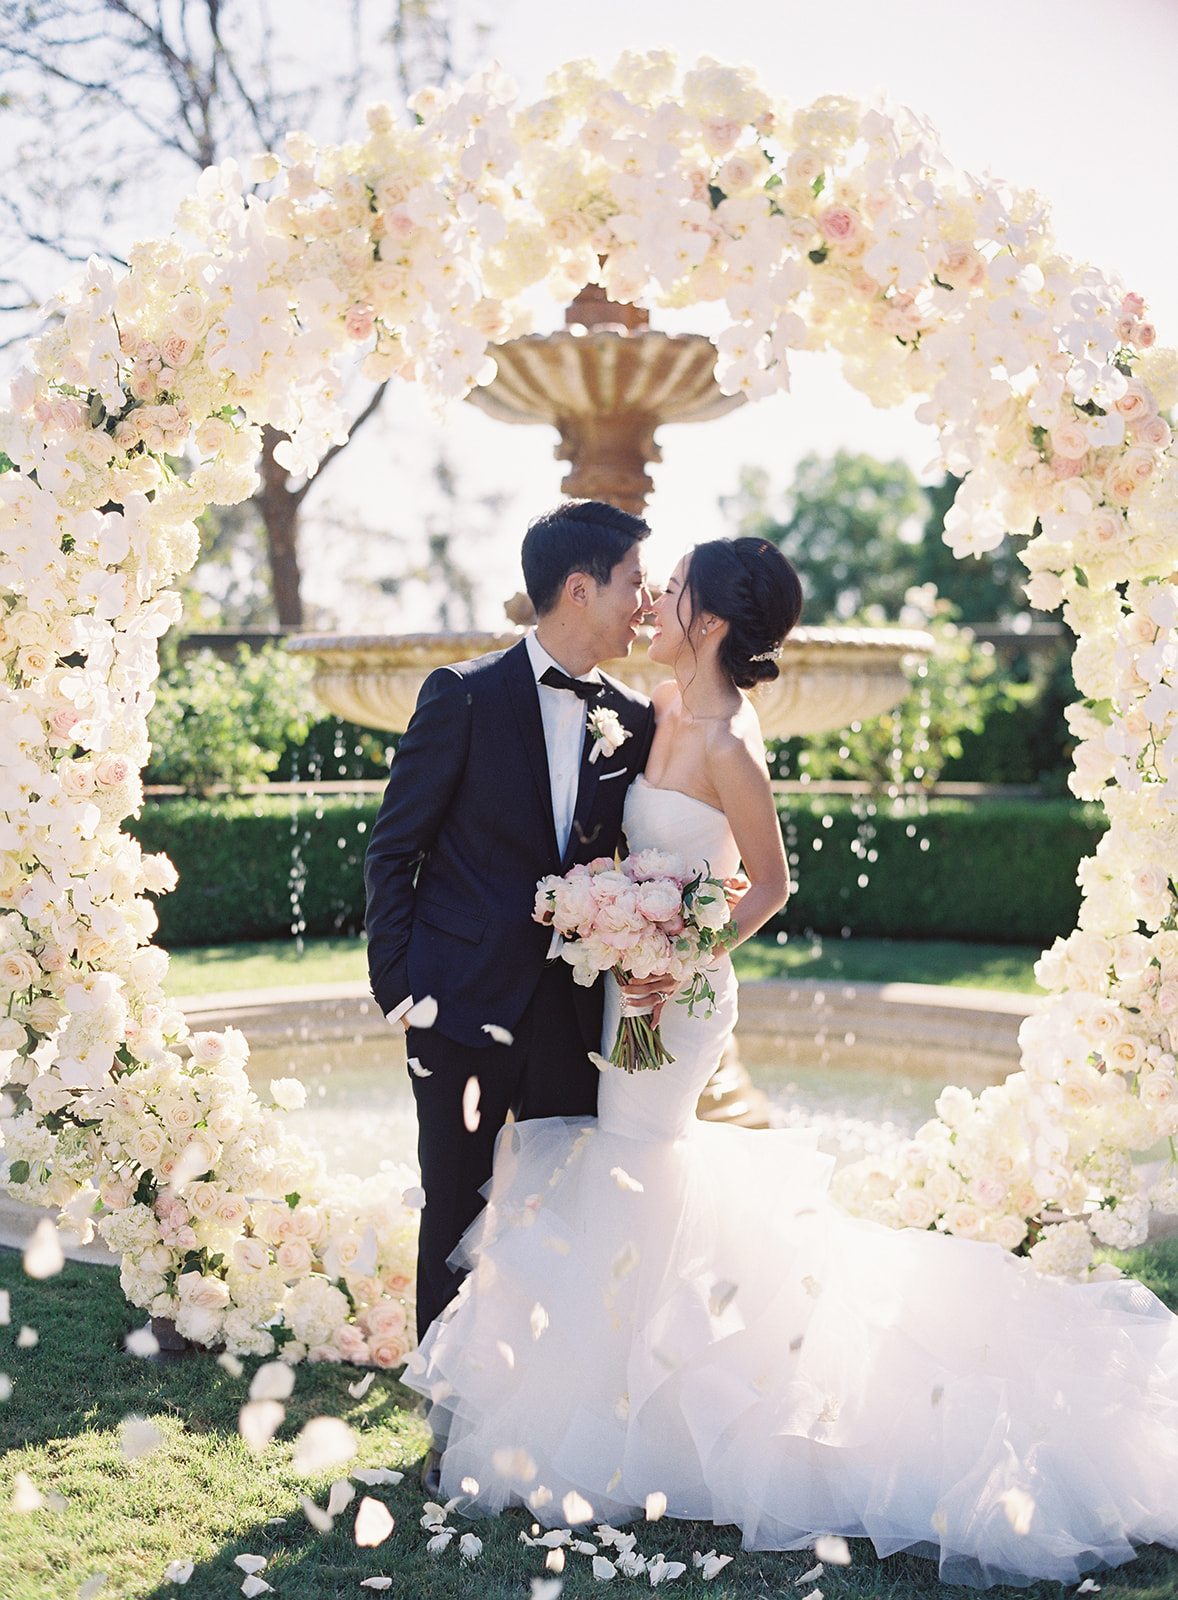 Bride and groom standing under a life size floral arch
